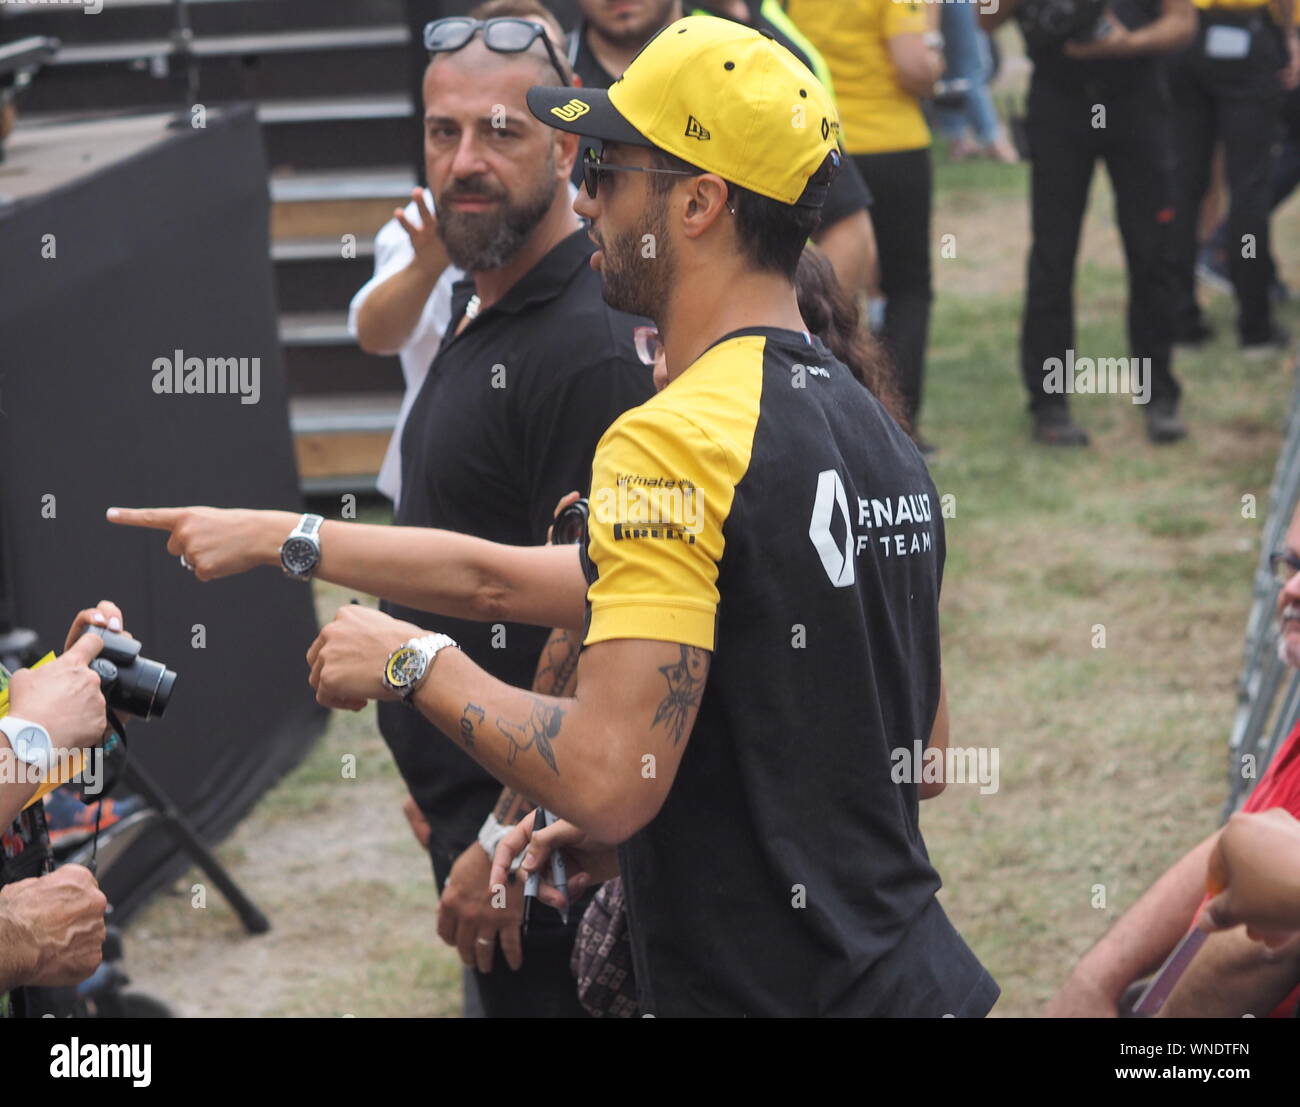 Monza, Italy 5 September 2019: Daniel Ricciardo is among his fans and givings autograph in Monza circuit paddock. Stock Photo